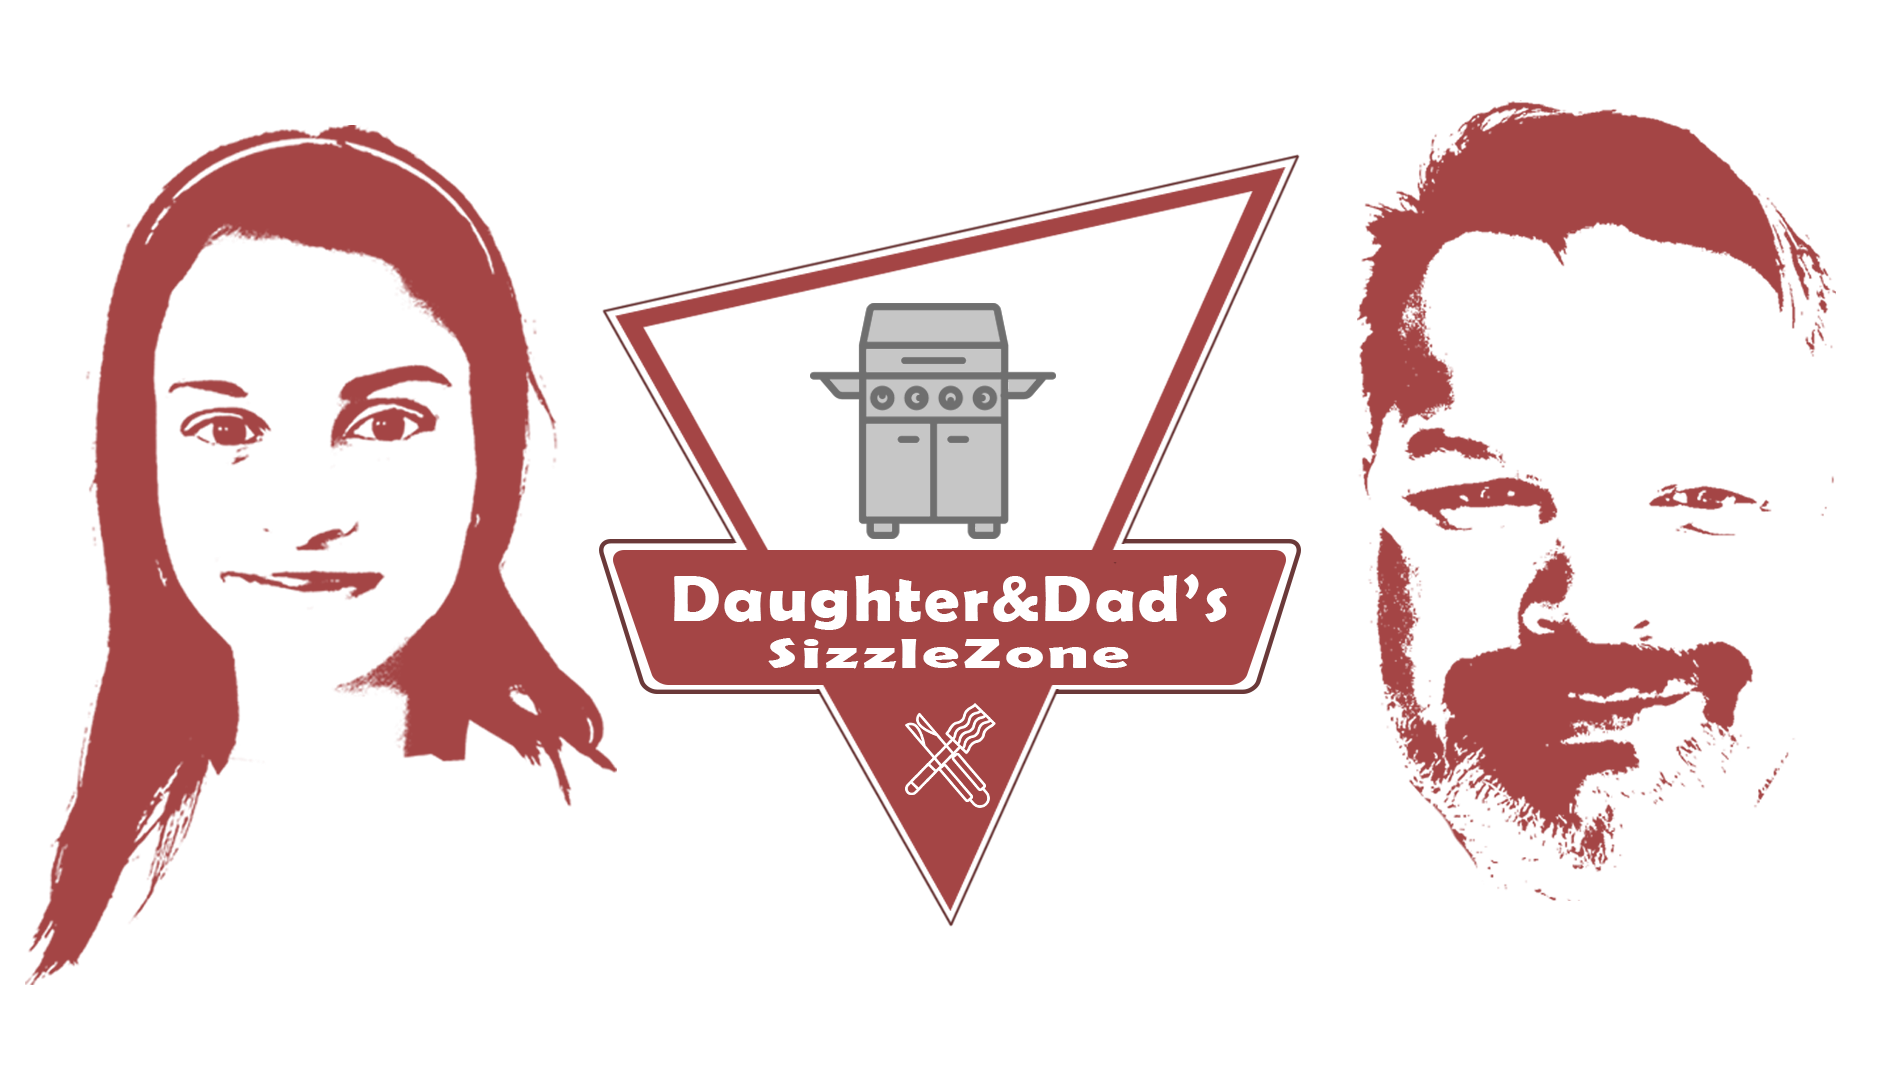 Daughter & Dad's Sizzlezone